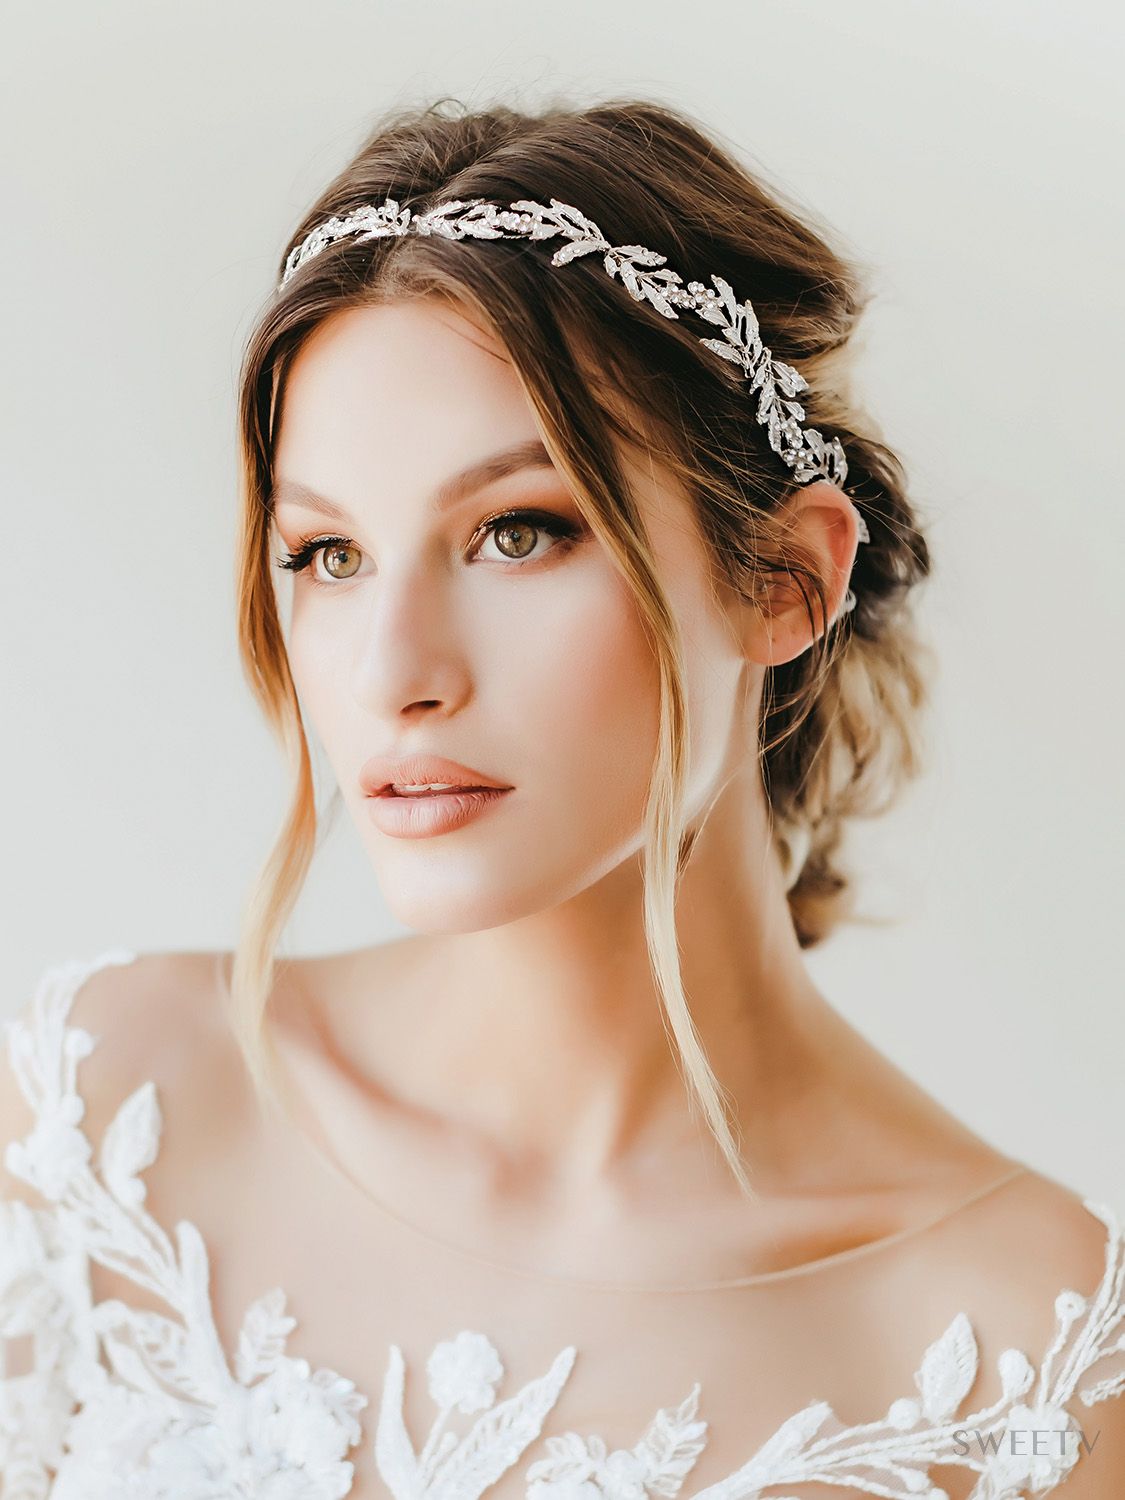 35+ Wedding Hair Accessories That Will Make You Look Gorgeous!